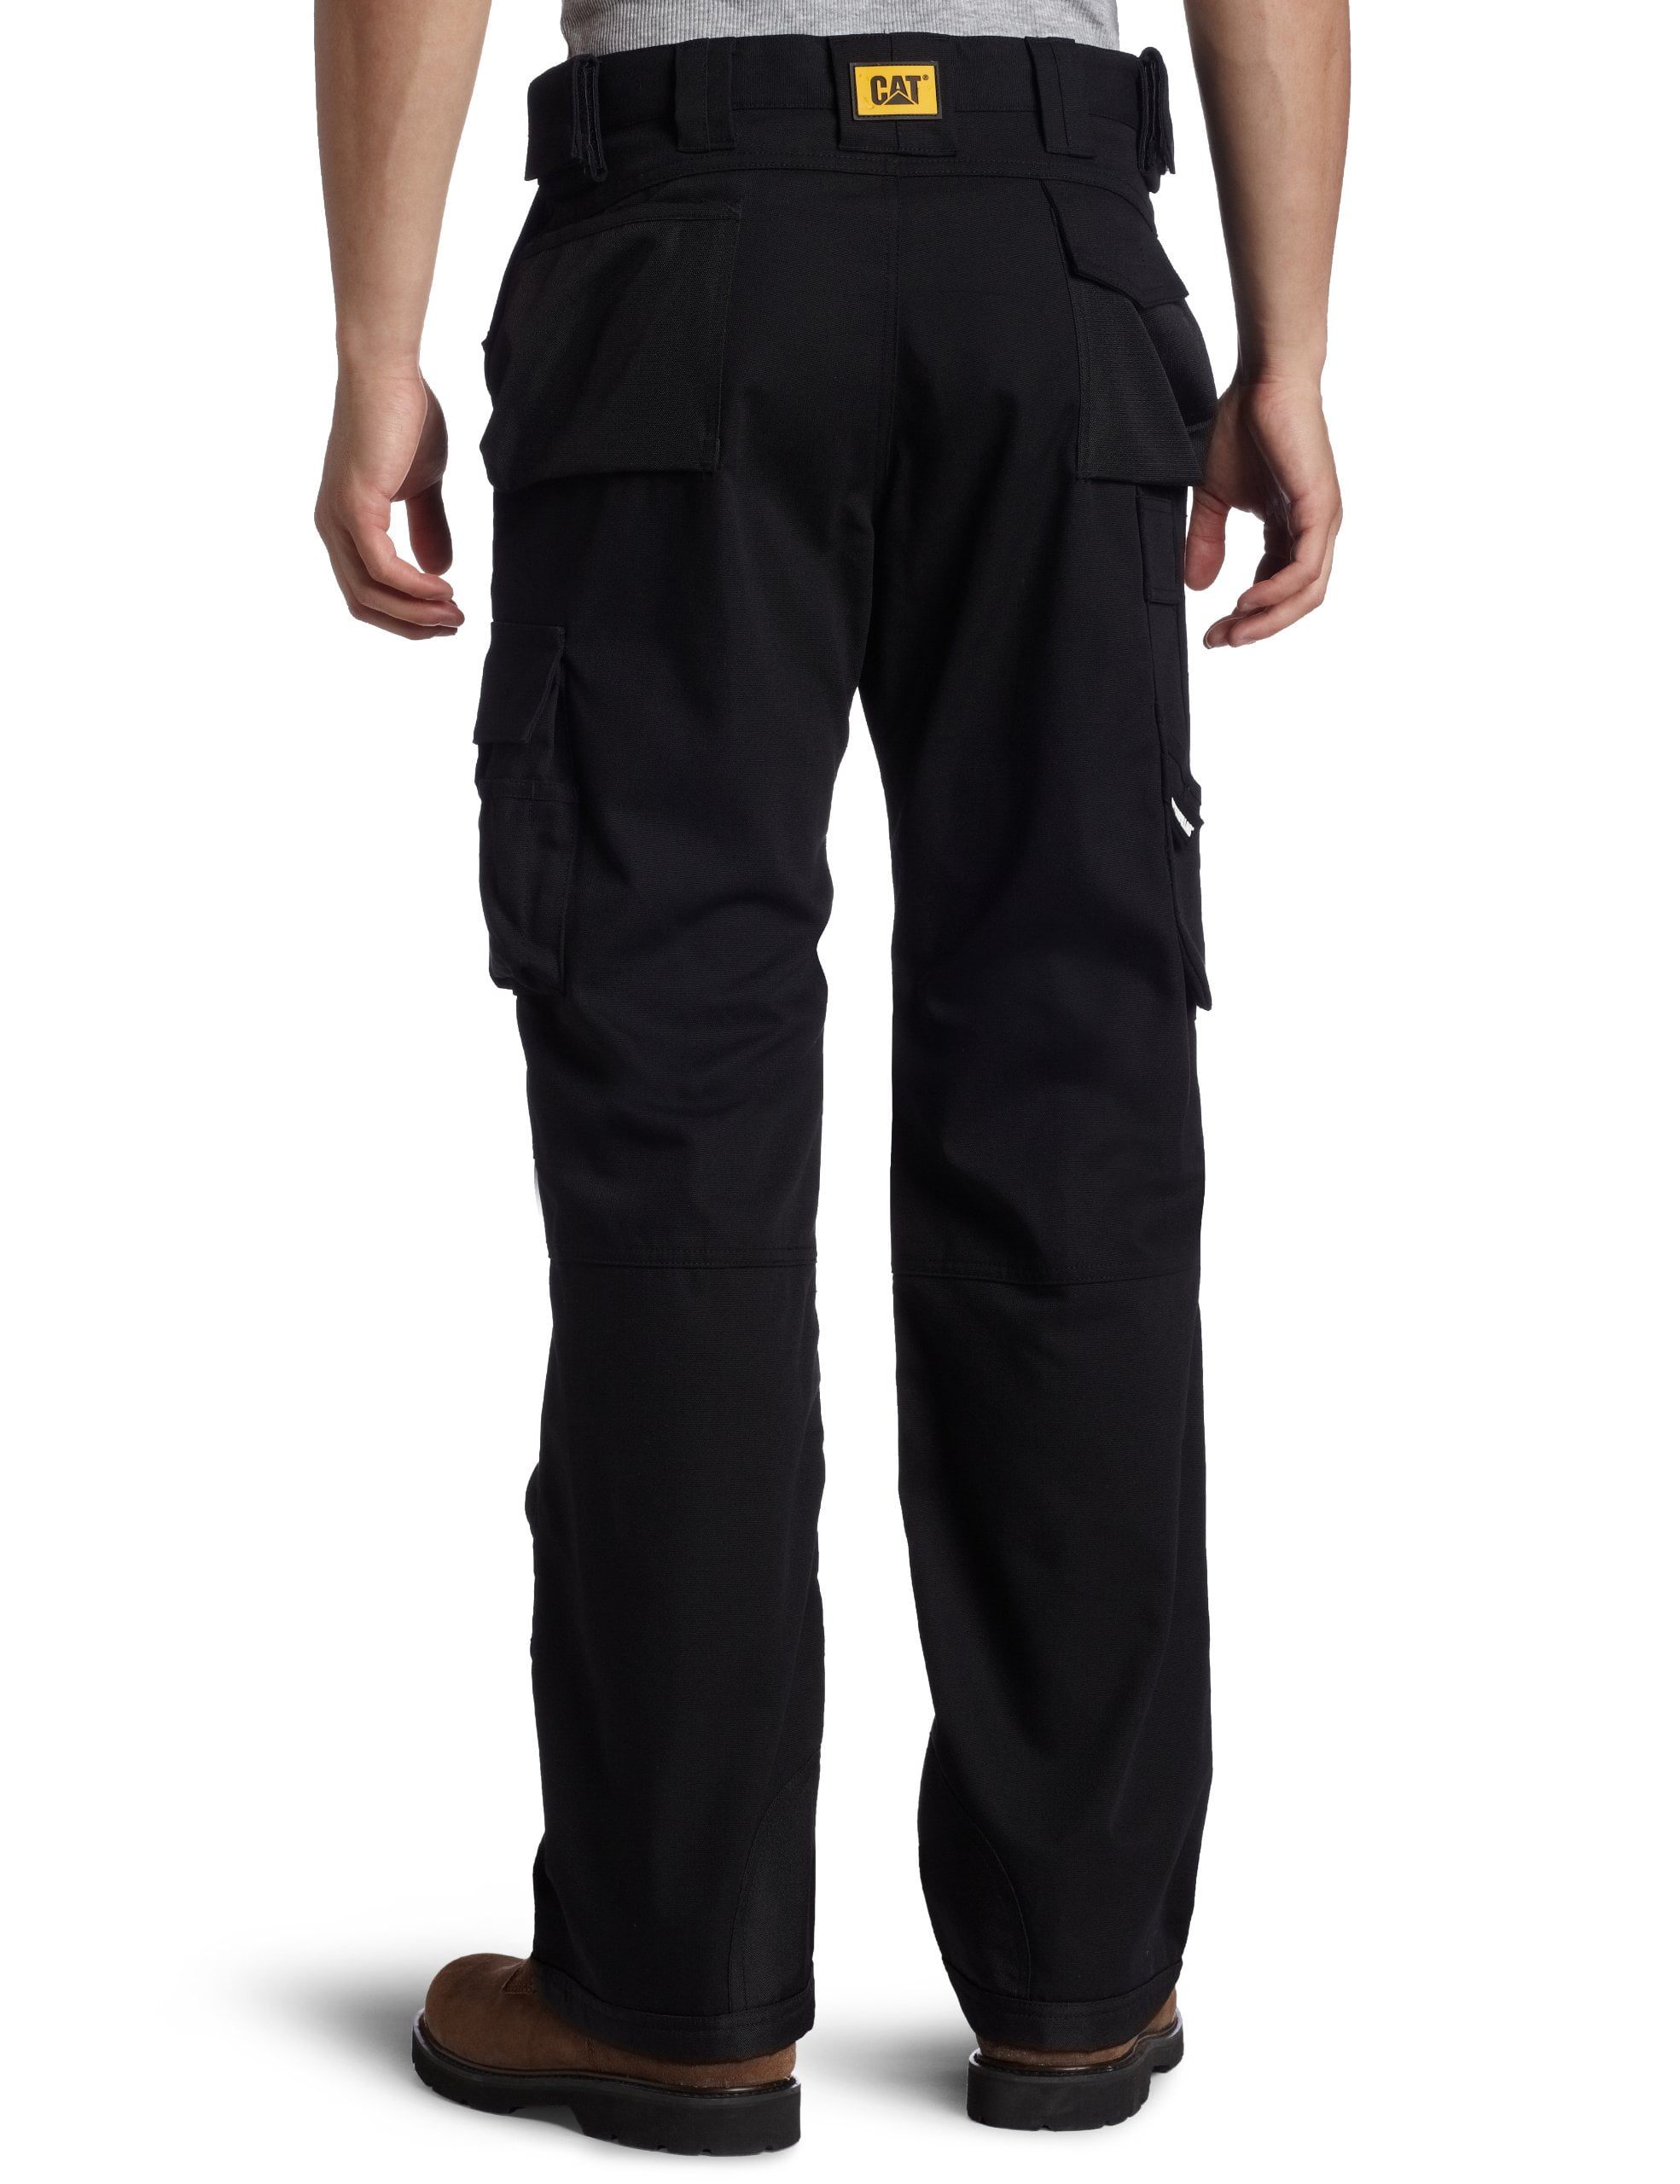 New Mens Cargo Work Wear Combat Pants Trousers Size Available 30"-40" 